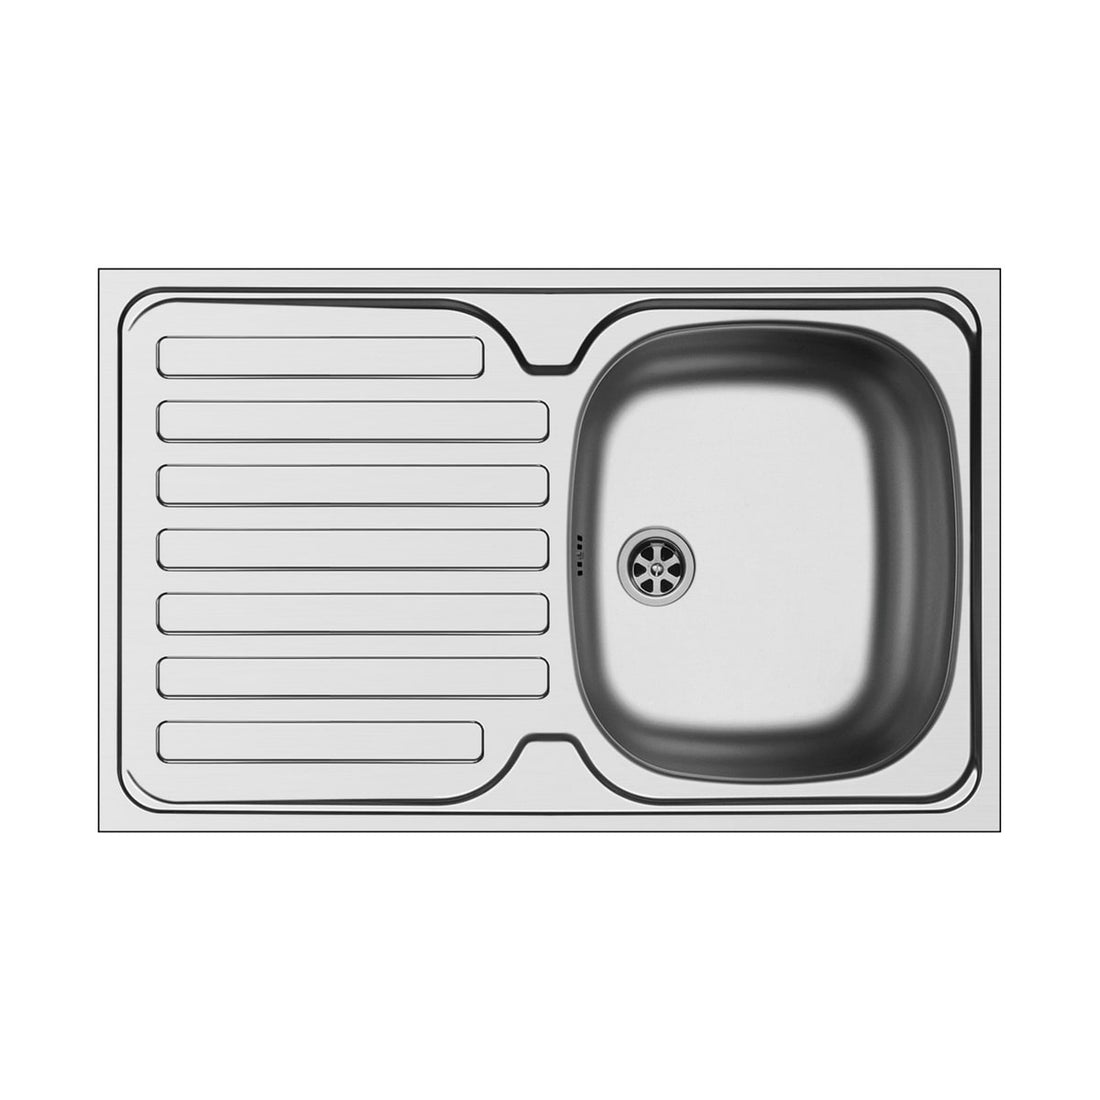 SINK L80xP50 2-BASIN SINK + SINK 2 AND STAINLESS STEEL FIXING HOOKS - best price from Maltashopper.com BR430002263